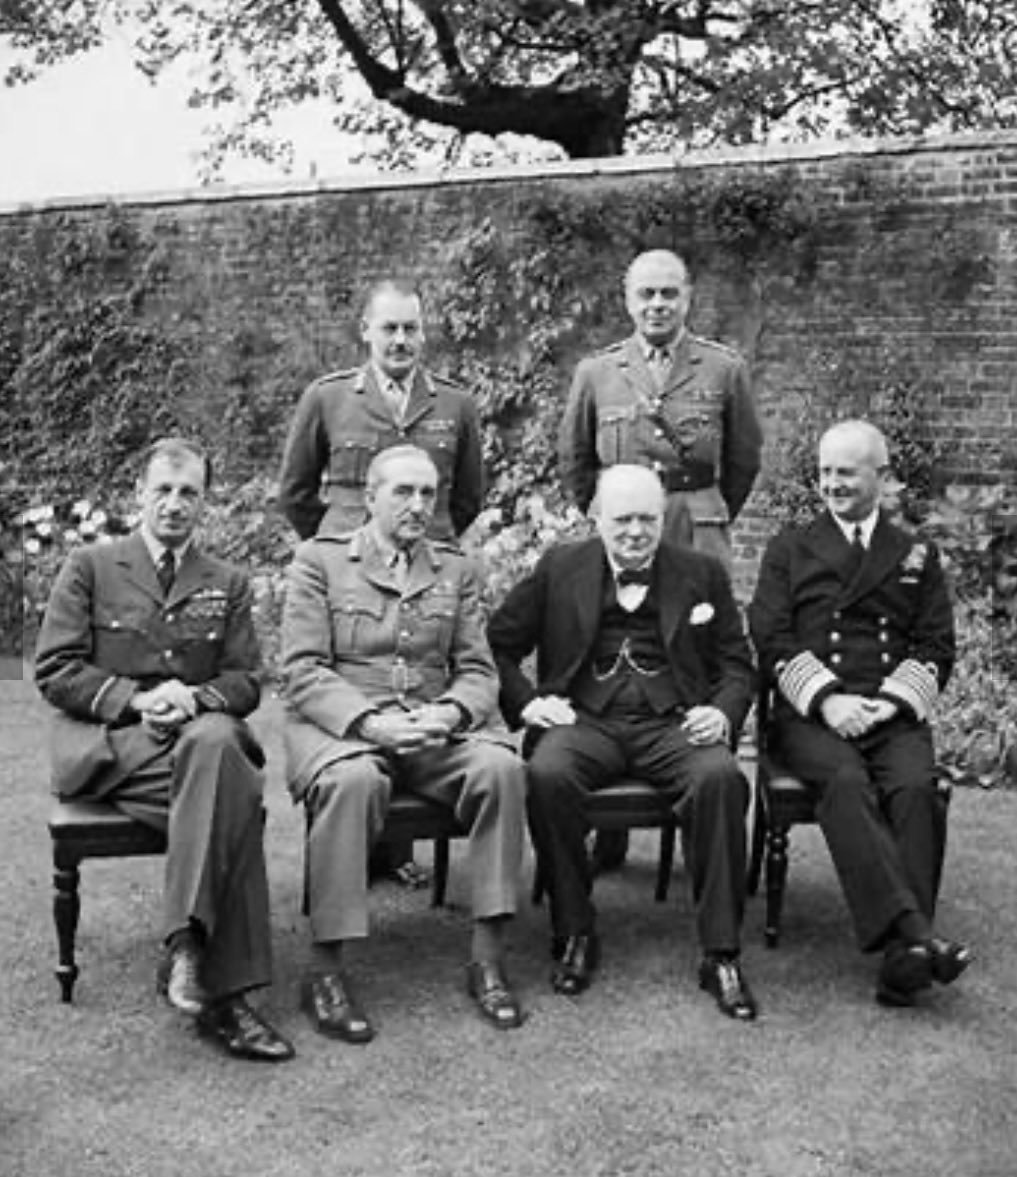 Tomorrow I am off to guide the Churchill War Rooms.

That I am able to do this is thanks to the man top right in this photo - Hastings&rsquo;Pug&rsquo; Ismay. 

Ismay was Churchill&rsquo;s chief military advisor during WW2 and it was he who recognise